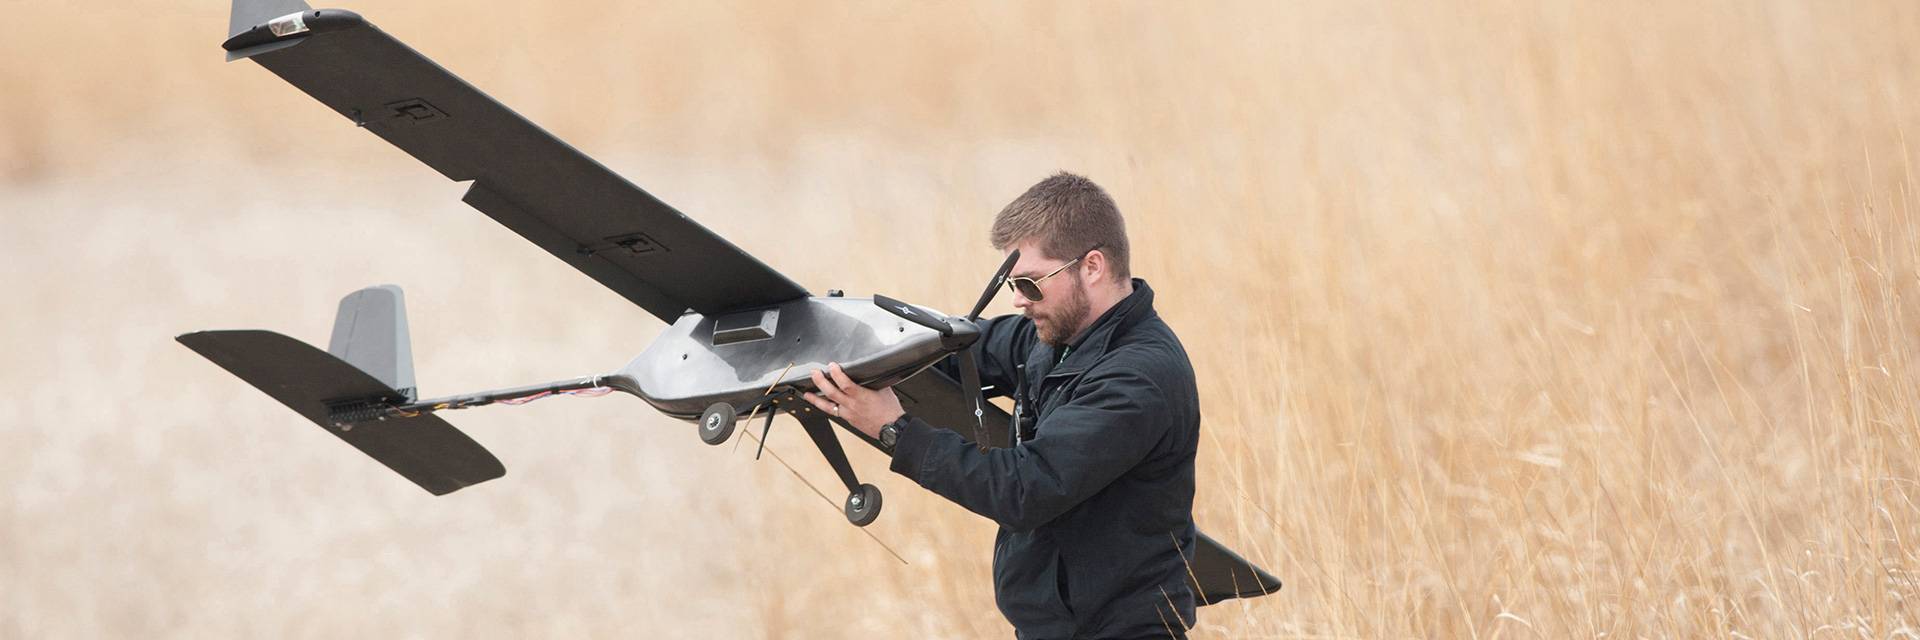 working with UAS in field